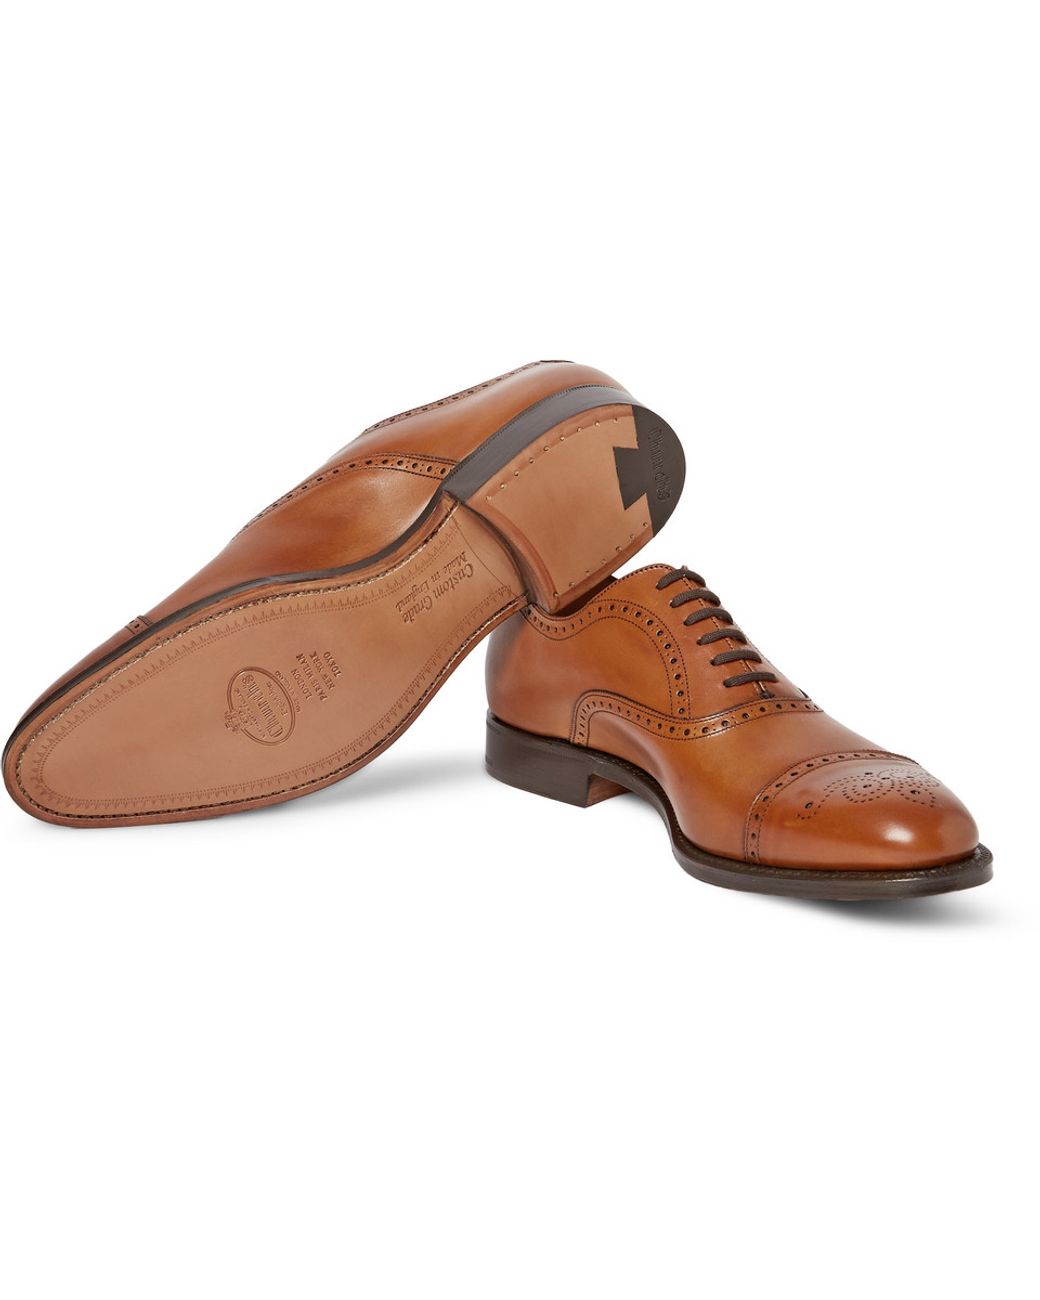 Church's Toronto Cap-Toe Leather Oxford Brogues in Brown for 